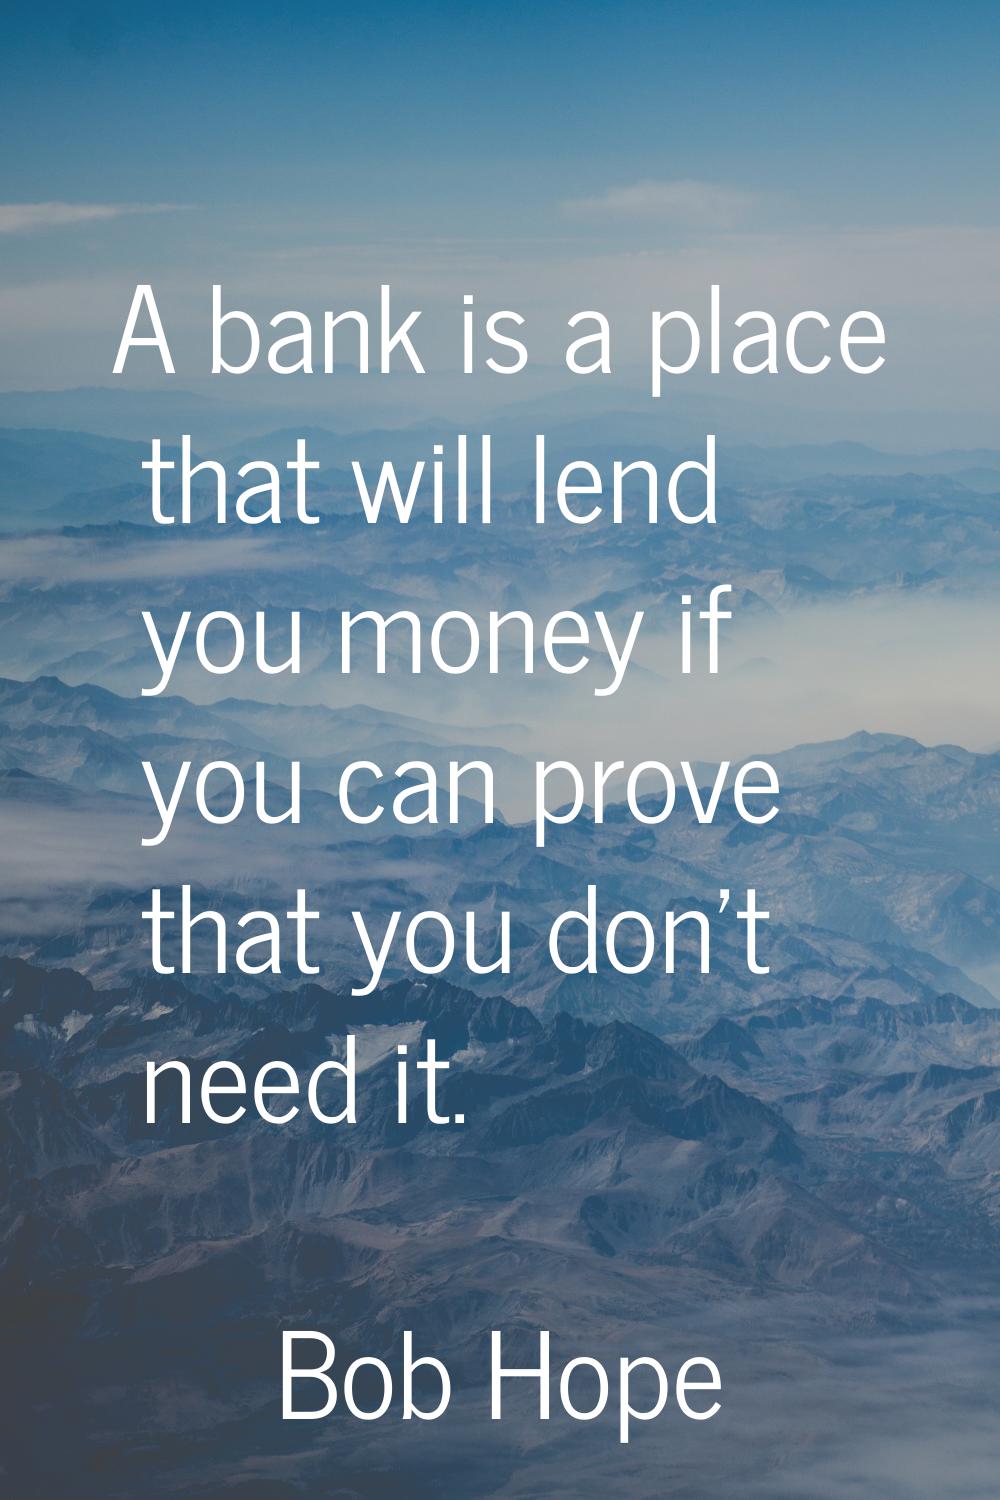 A bank is a place that will lend you money if you can prove that you don't need it.